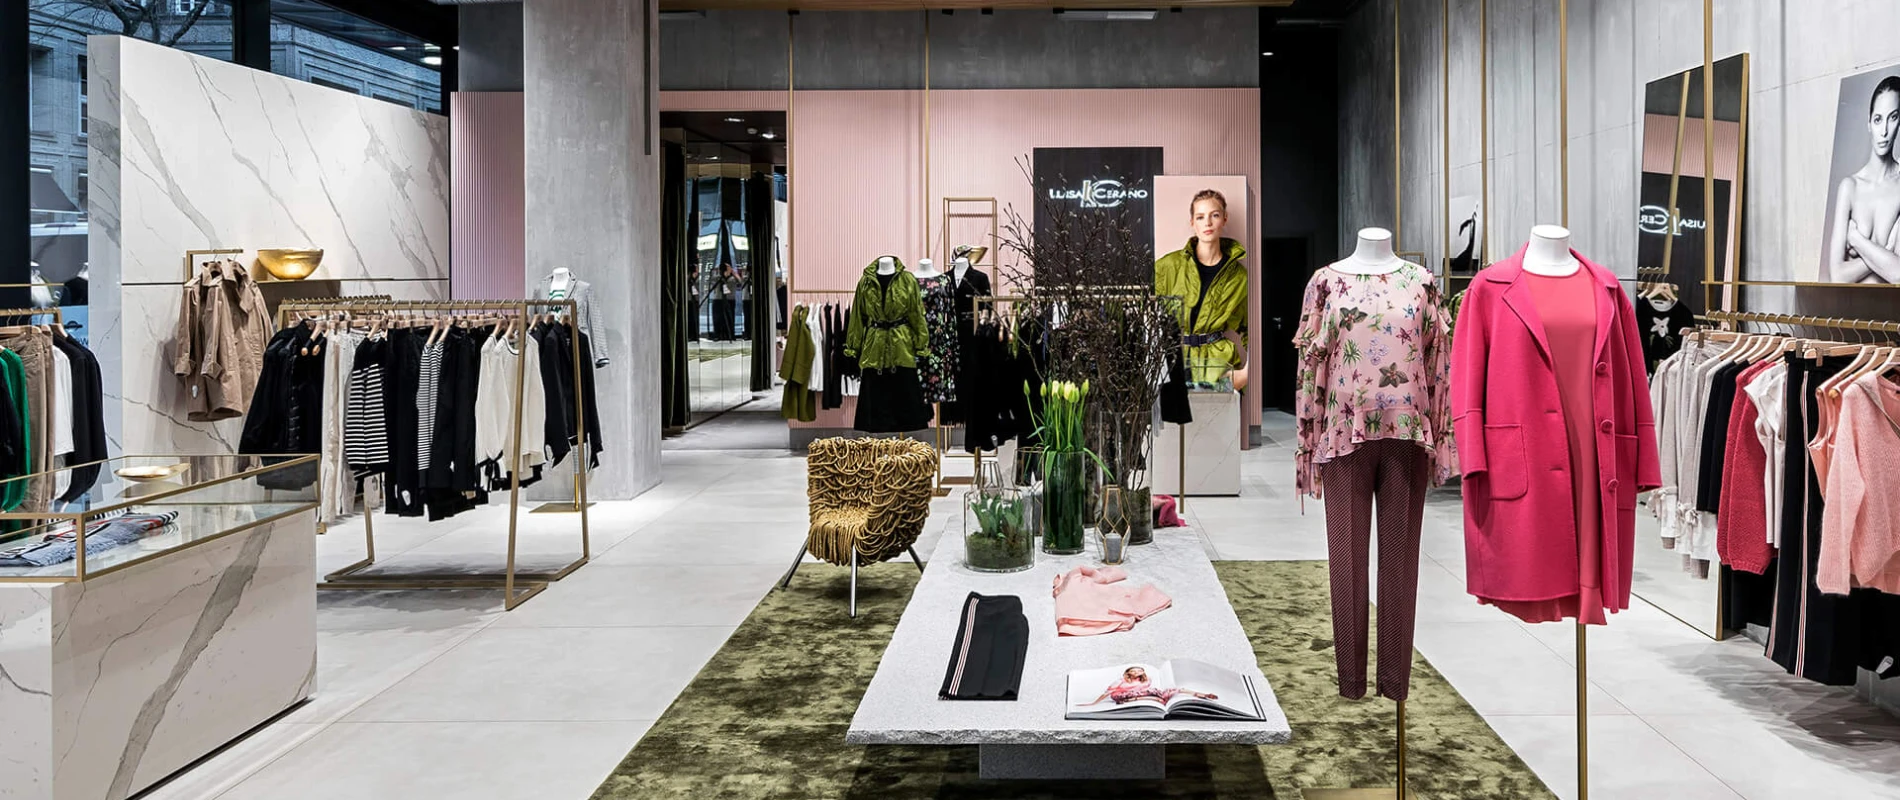 Flagship store - design and complete outfitting - Luisa Cerano Düsseldorf - overview